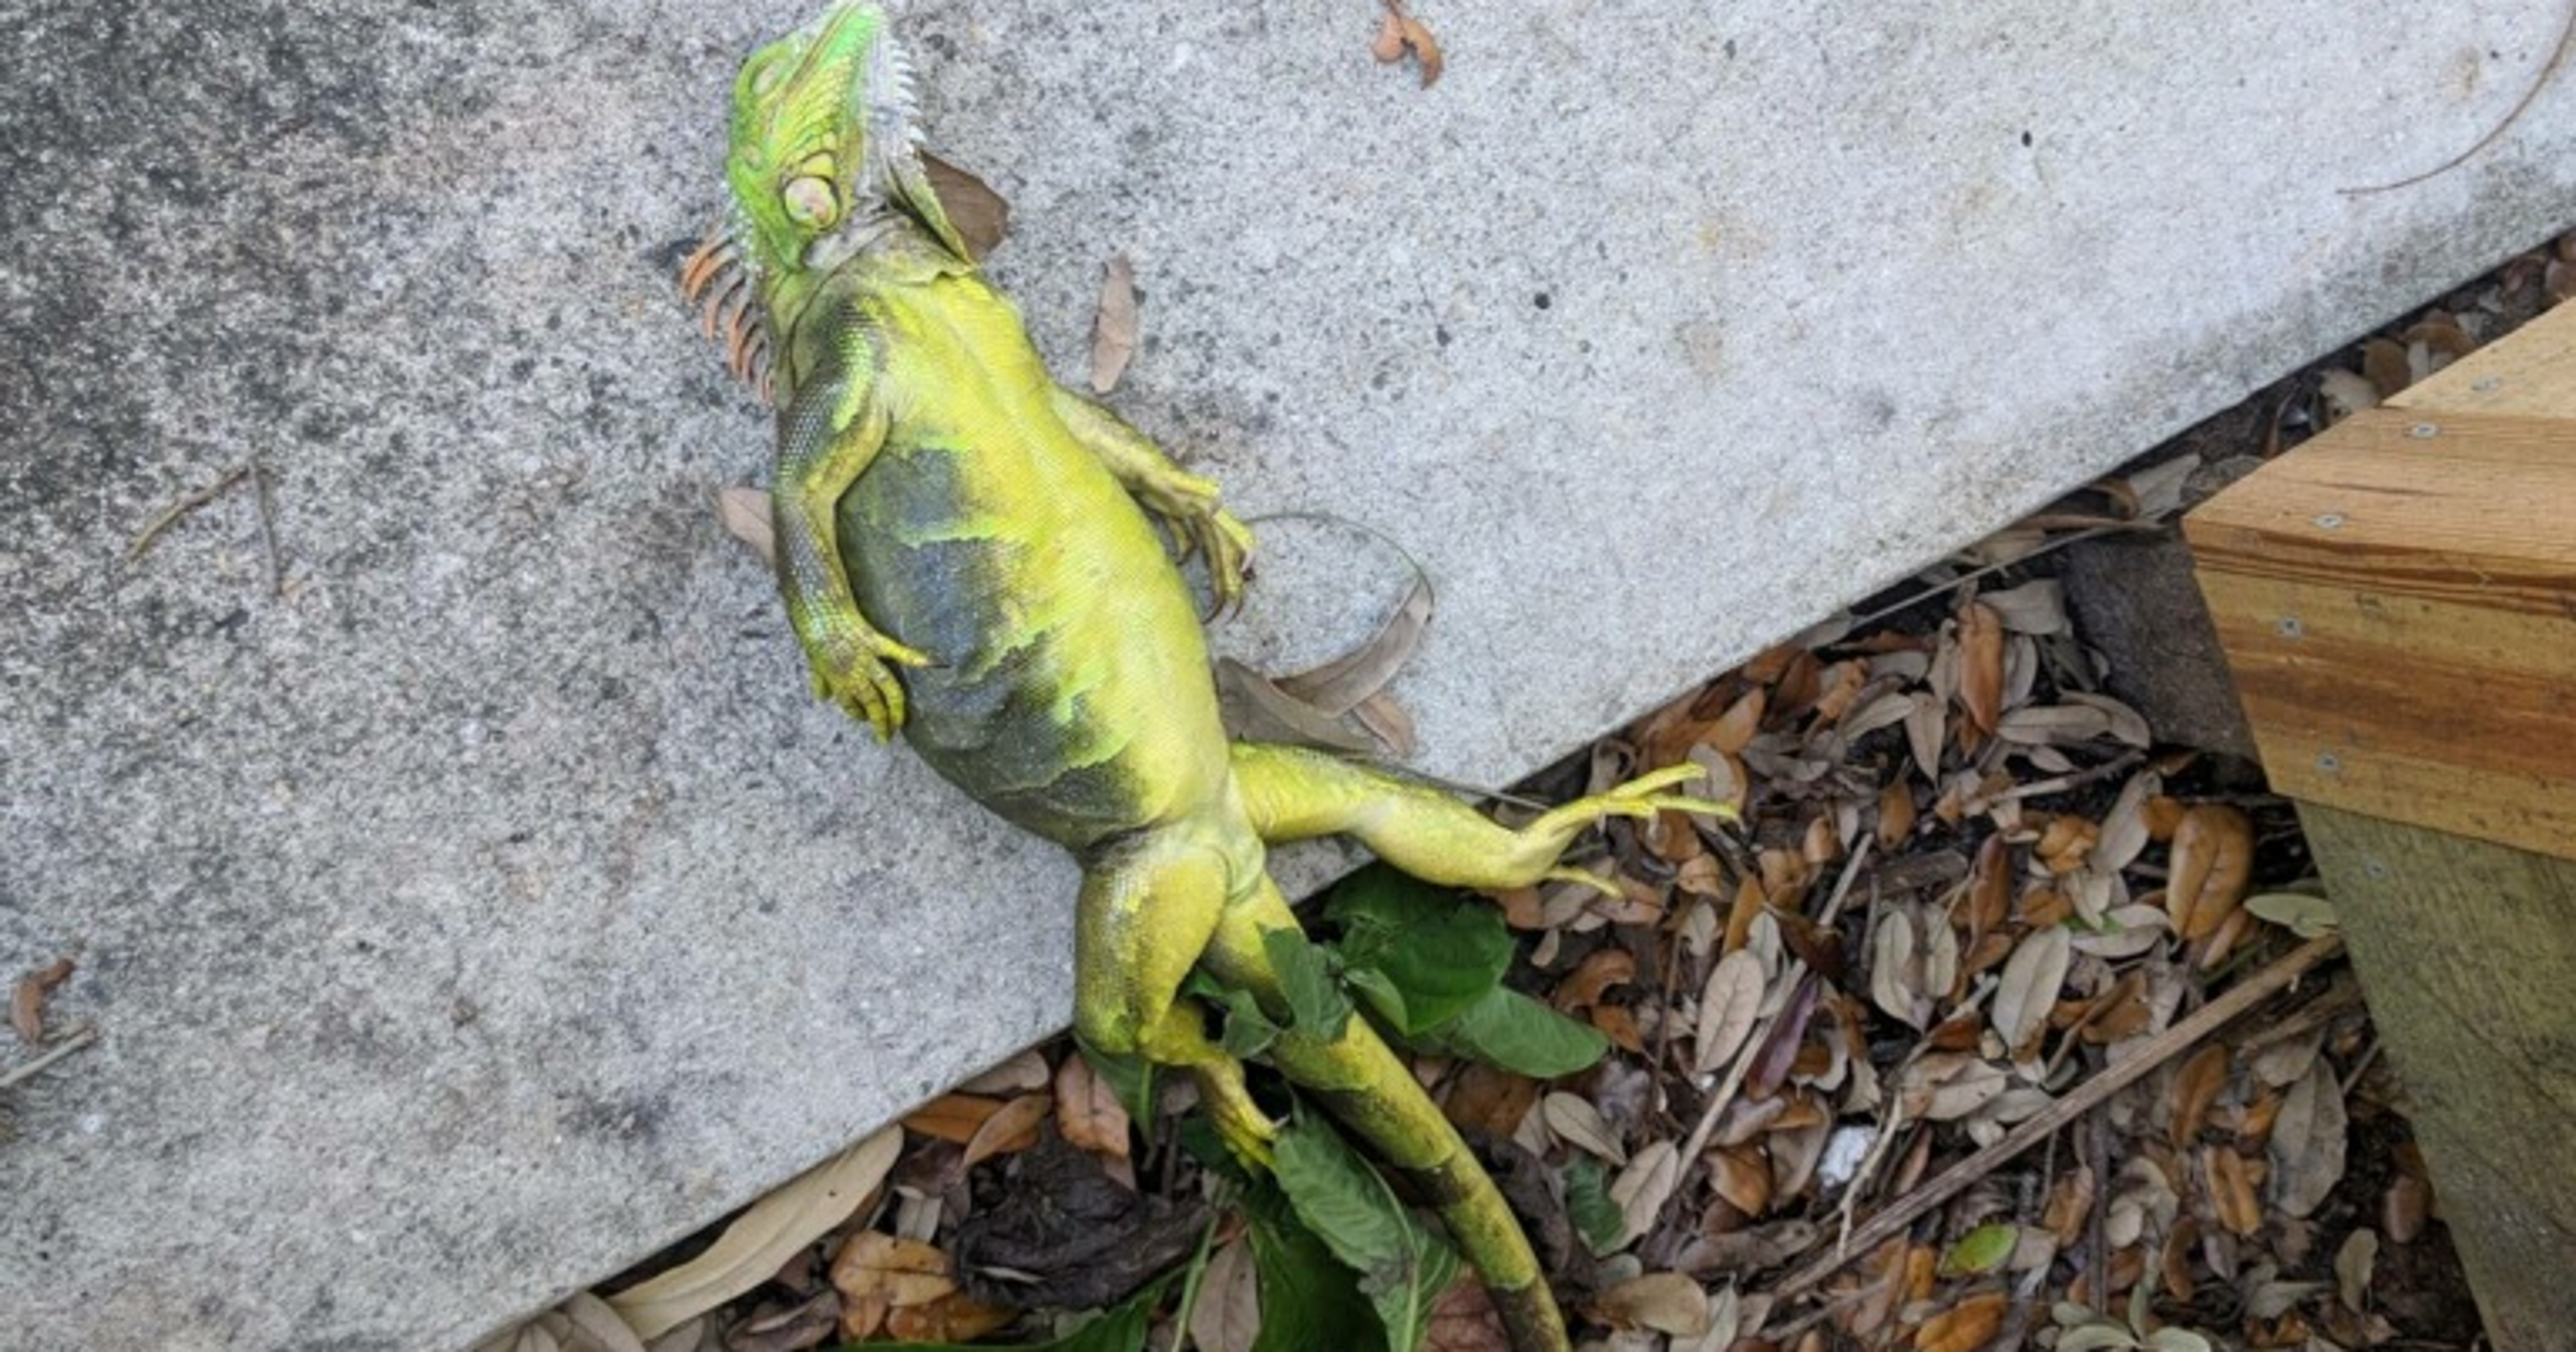 It's so cold in Florida, iguanas are falling from trees